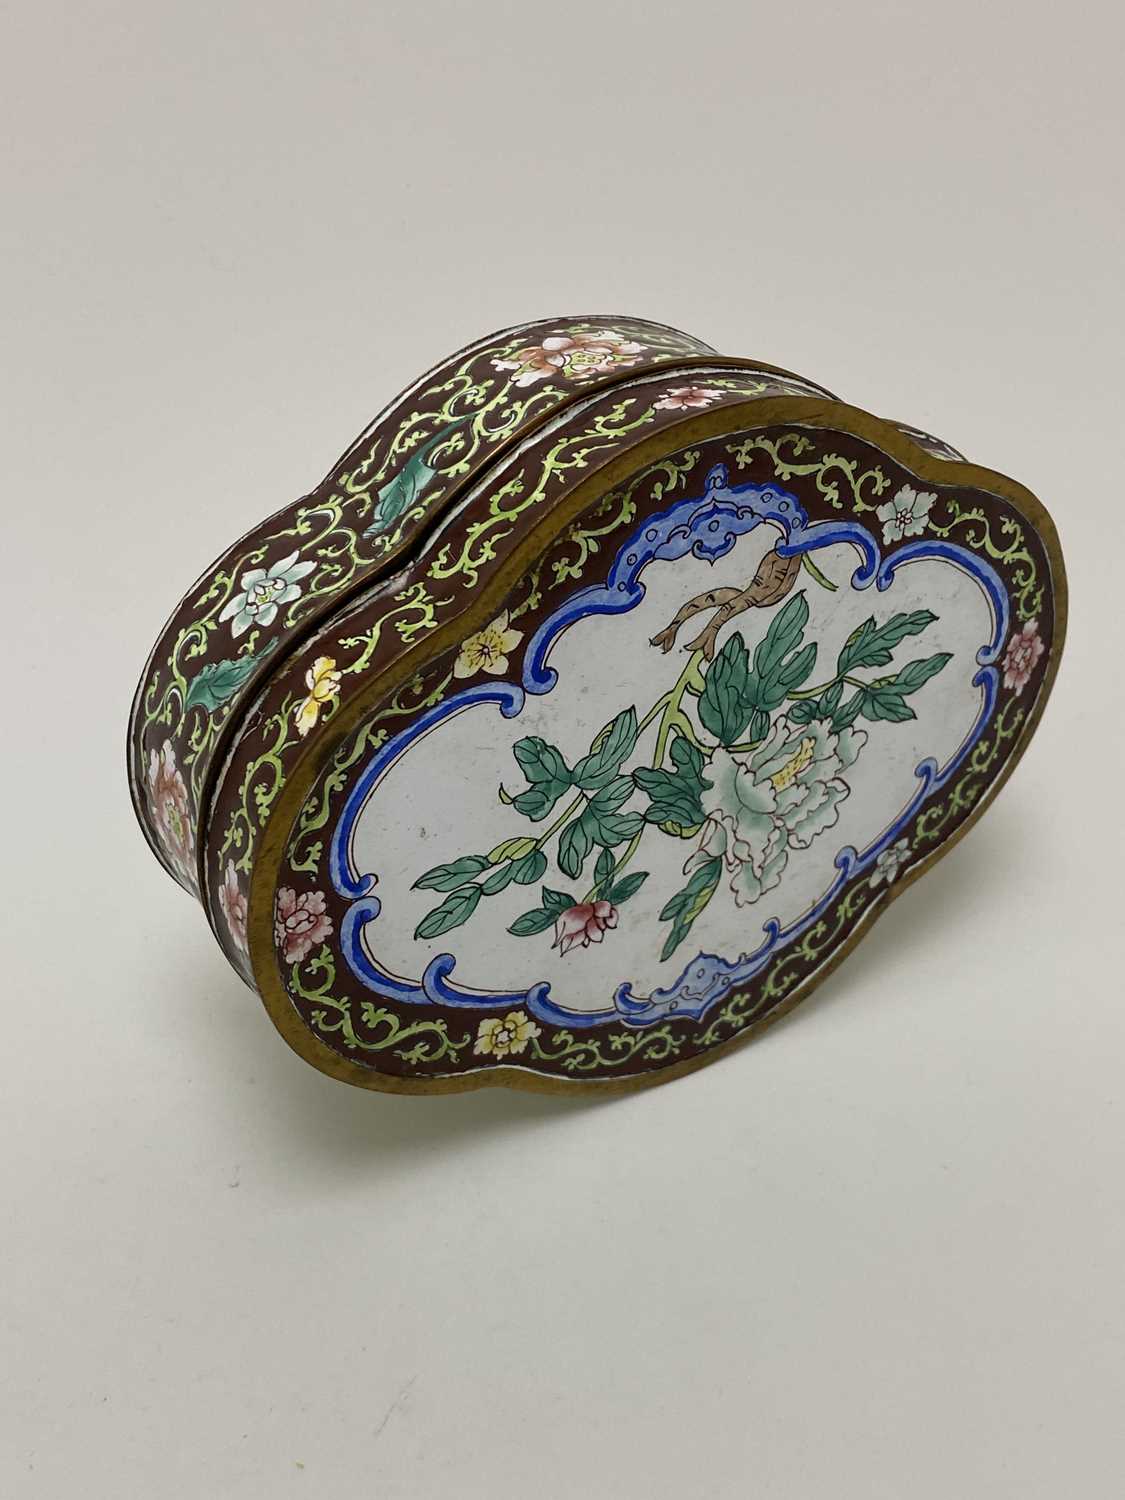 CHINESE CANTON ENAMEL TRINKET BOX, LATE 19TH/EARLY 20TH CENTURY